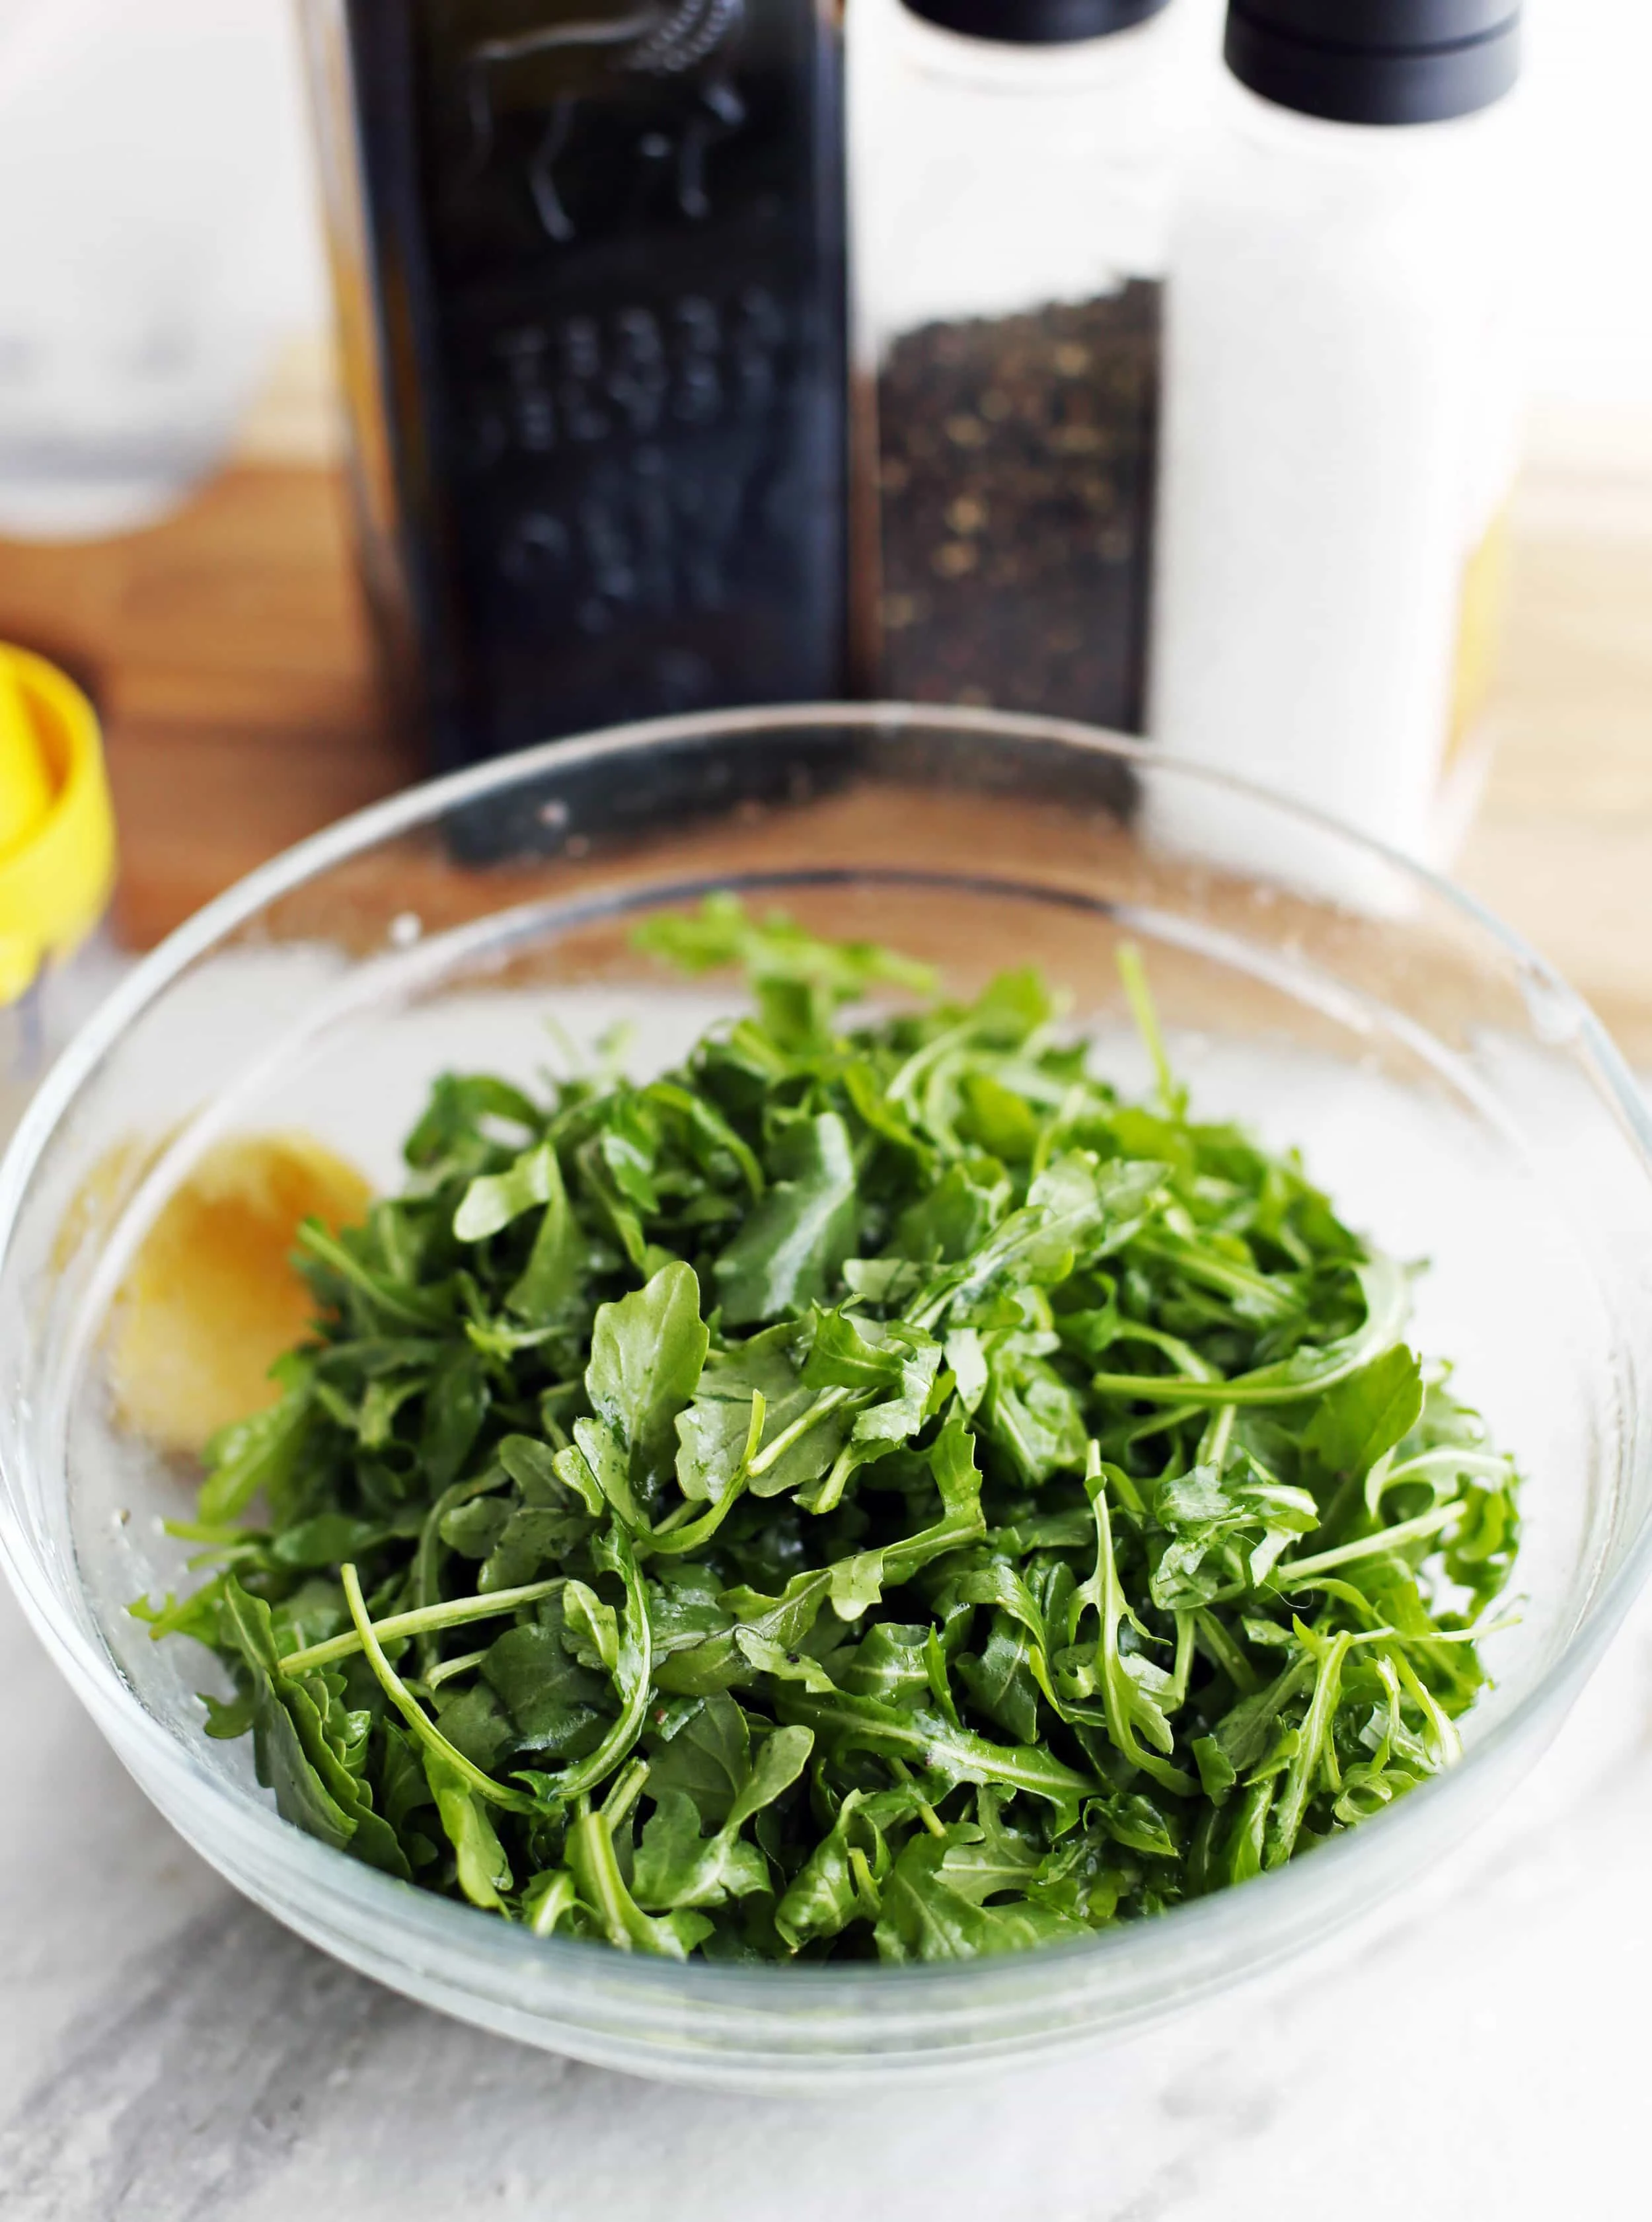 Baby arugula that has been tossed with olive oil, lemon juice, salt, and pepper in a glass bowl.